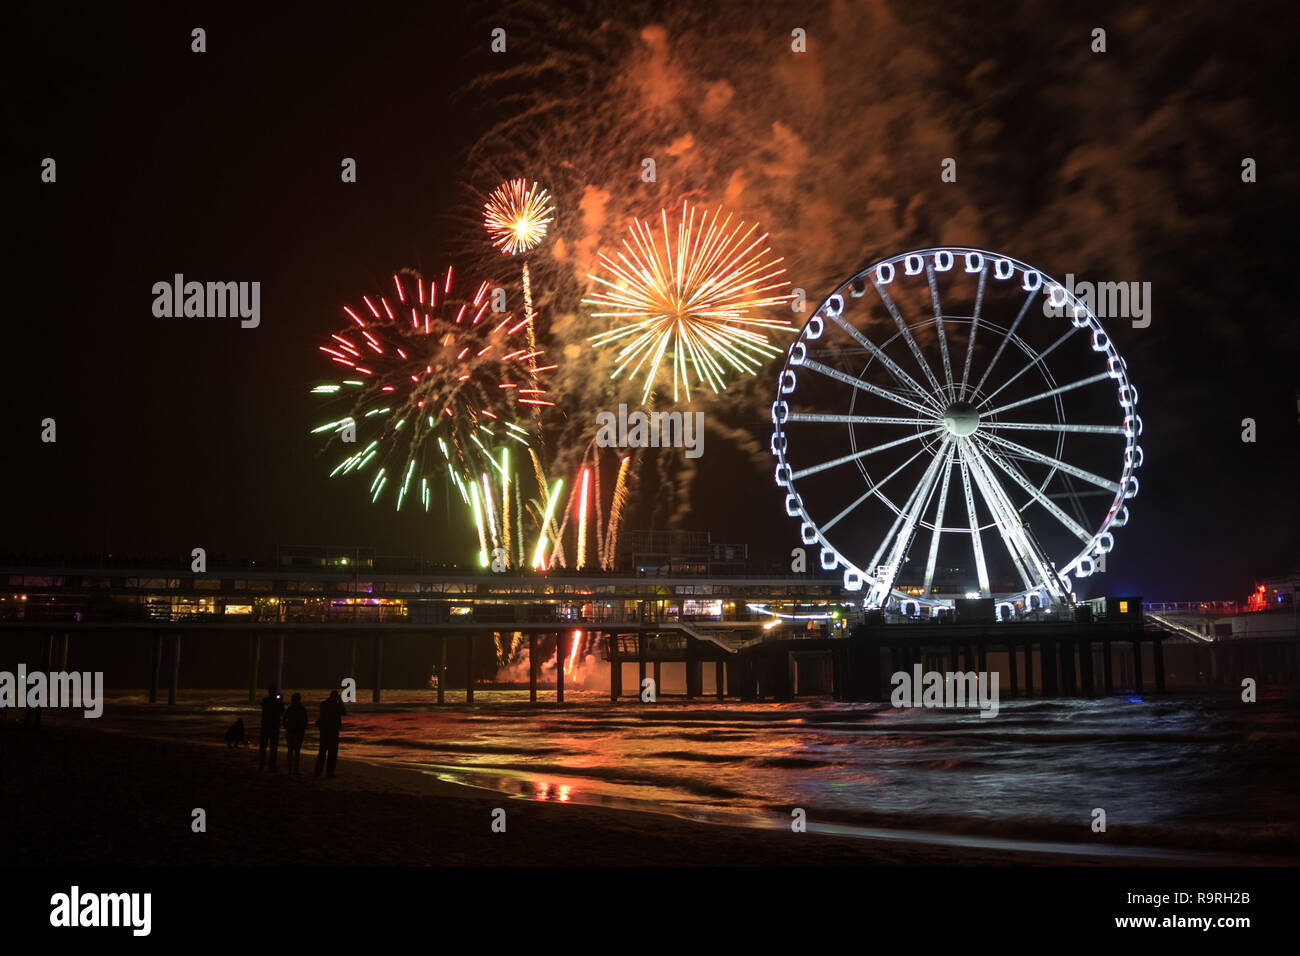 Spinning Ferris Wheel and international fireworks competition at the beach in Scheveningen, the Netherlands Stock Photo